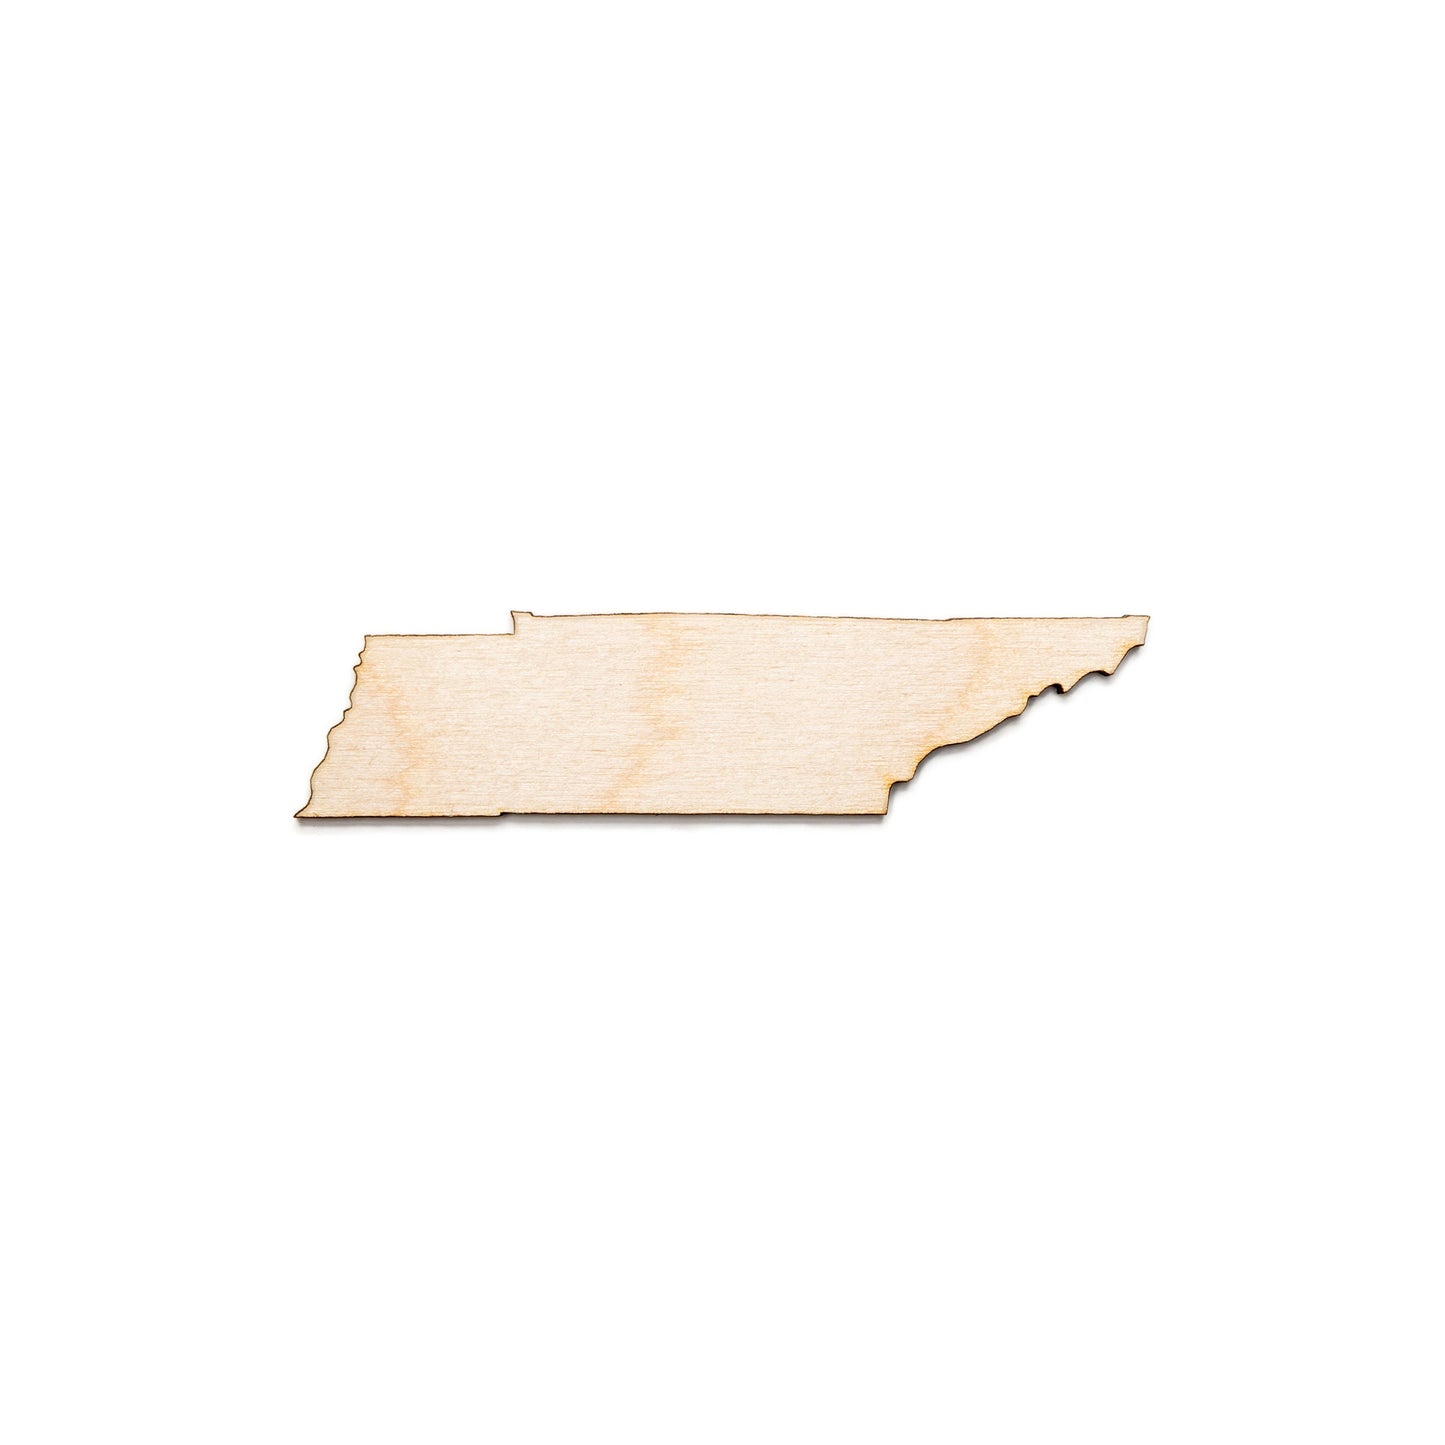 Tennessee State Wood Cutout-State Wood Decor-Various Sizes-Geography Decor-USA States Decor-Individual State Cutout-Wooden States Home Decor